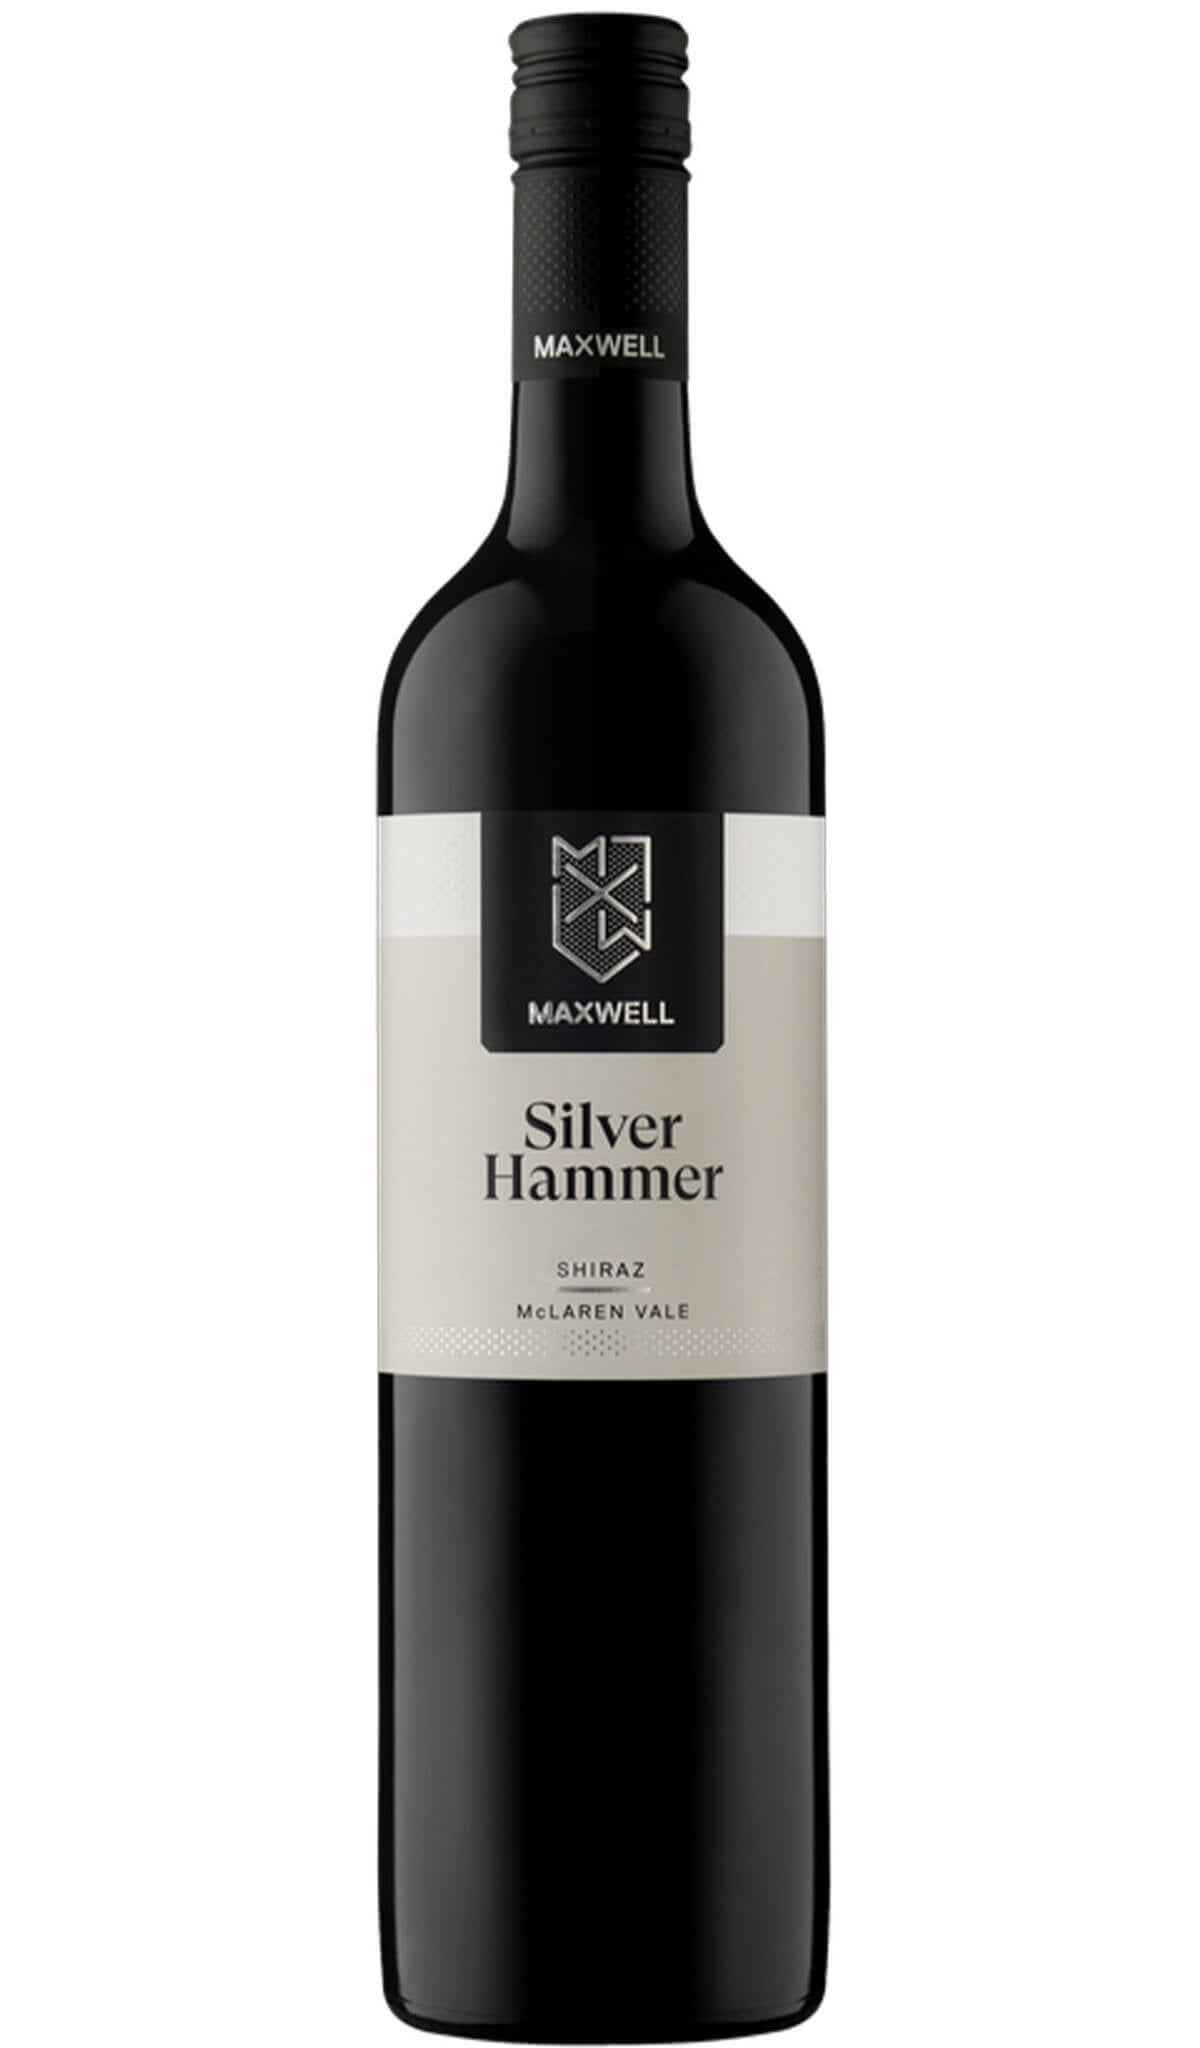 Find out more or buy Maxwell Silver Hammer Shiraz 2021 (McLaren Vale) online at Wine Sellers Direct - Australia’s independent liquor specialists.